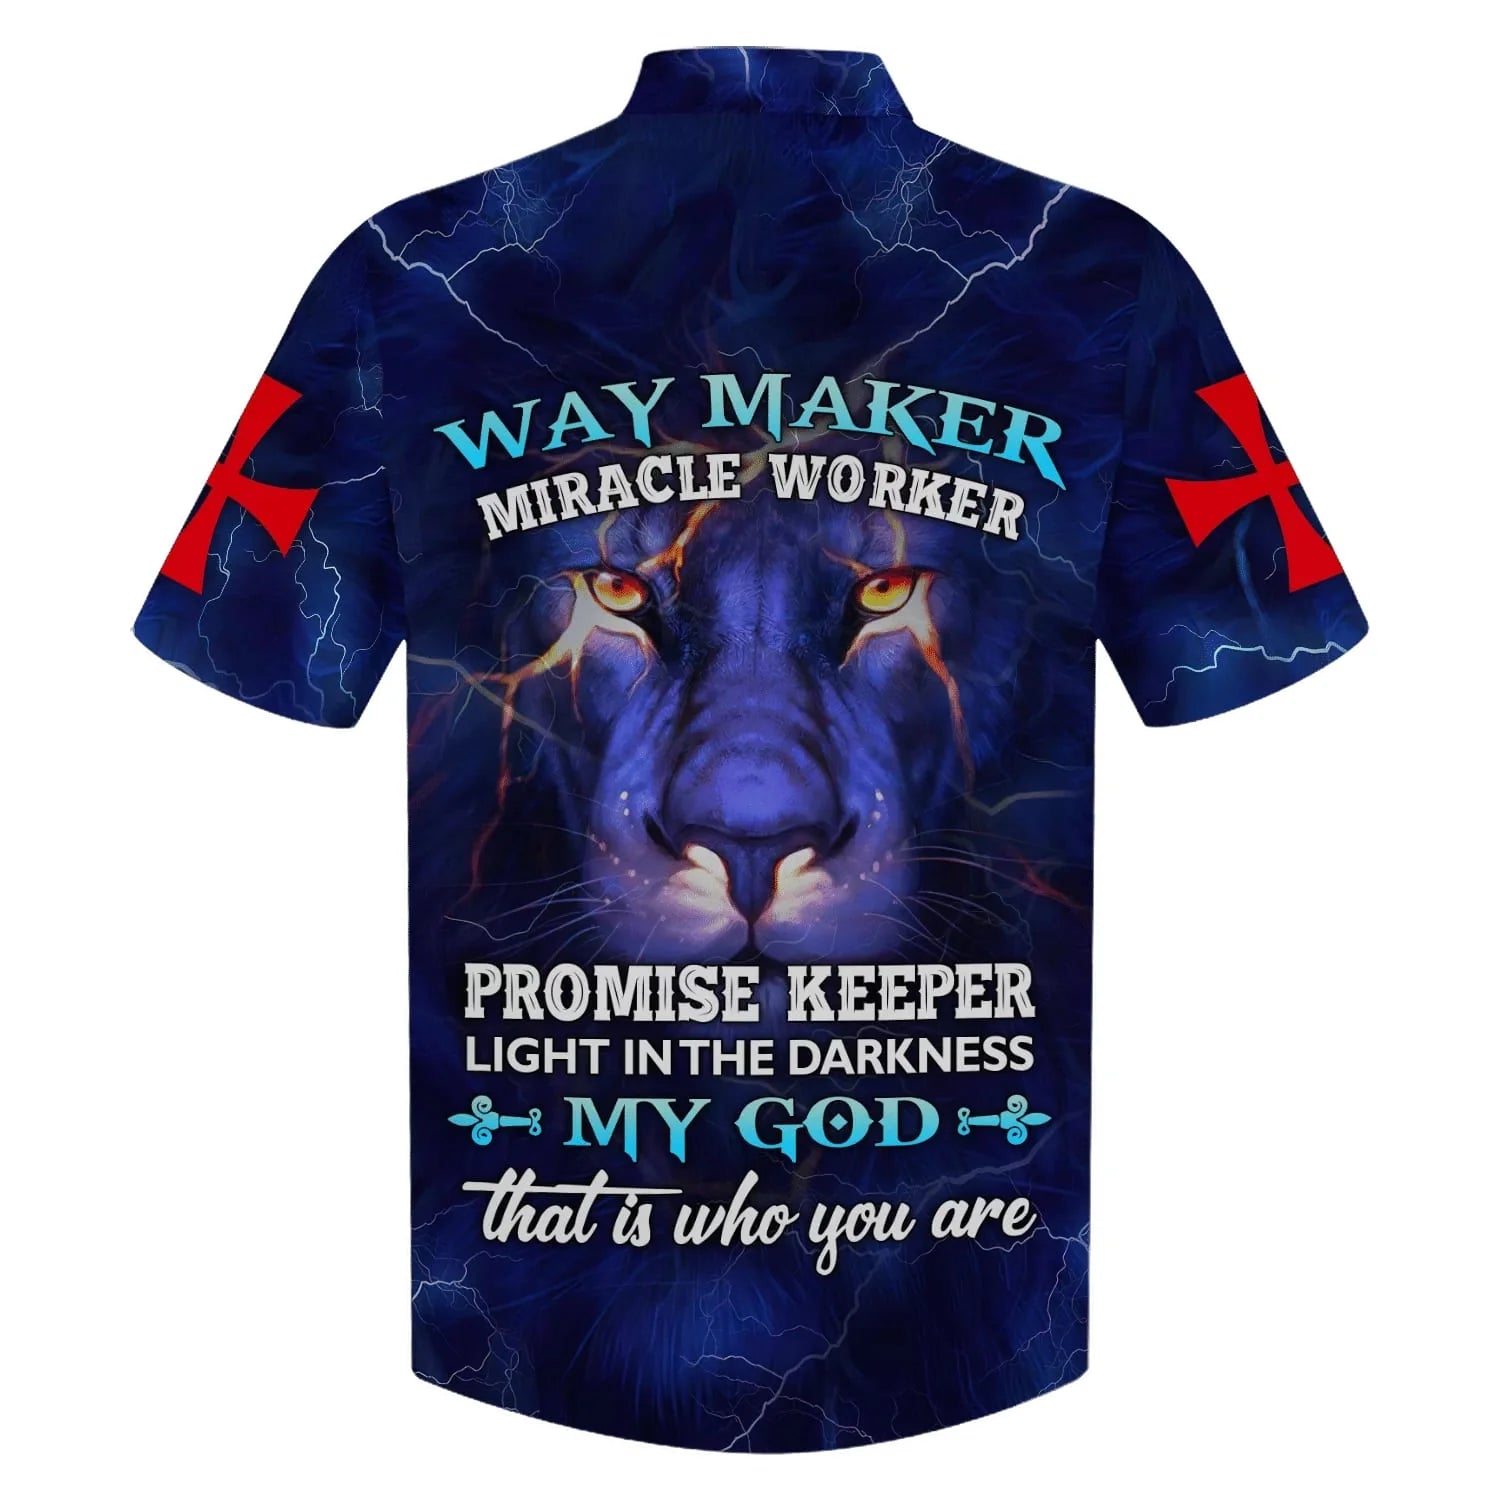 Christianartbag Hawaiian Shirt, Way Maker Miracle Worker Promise Keeper Light In The Darkness My God That Is Who You Are Lion Hawaiian Shirt, Christian Hawaiian Shirts For Men & Women. - Christian Art Bag